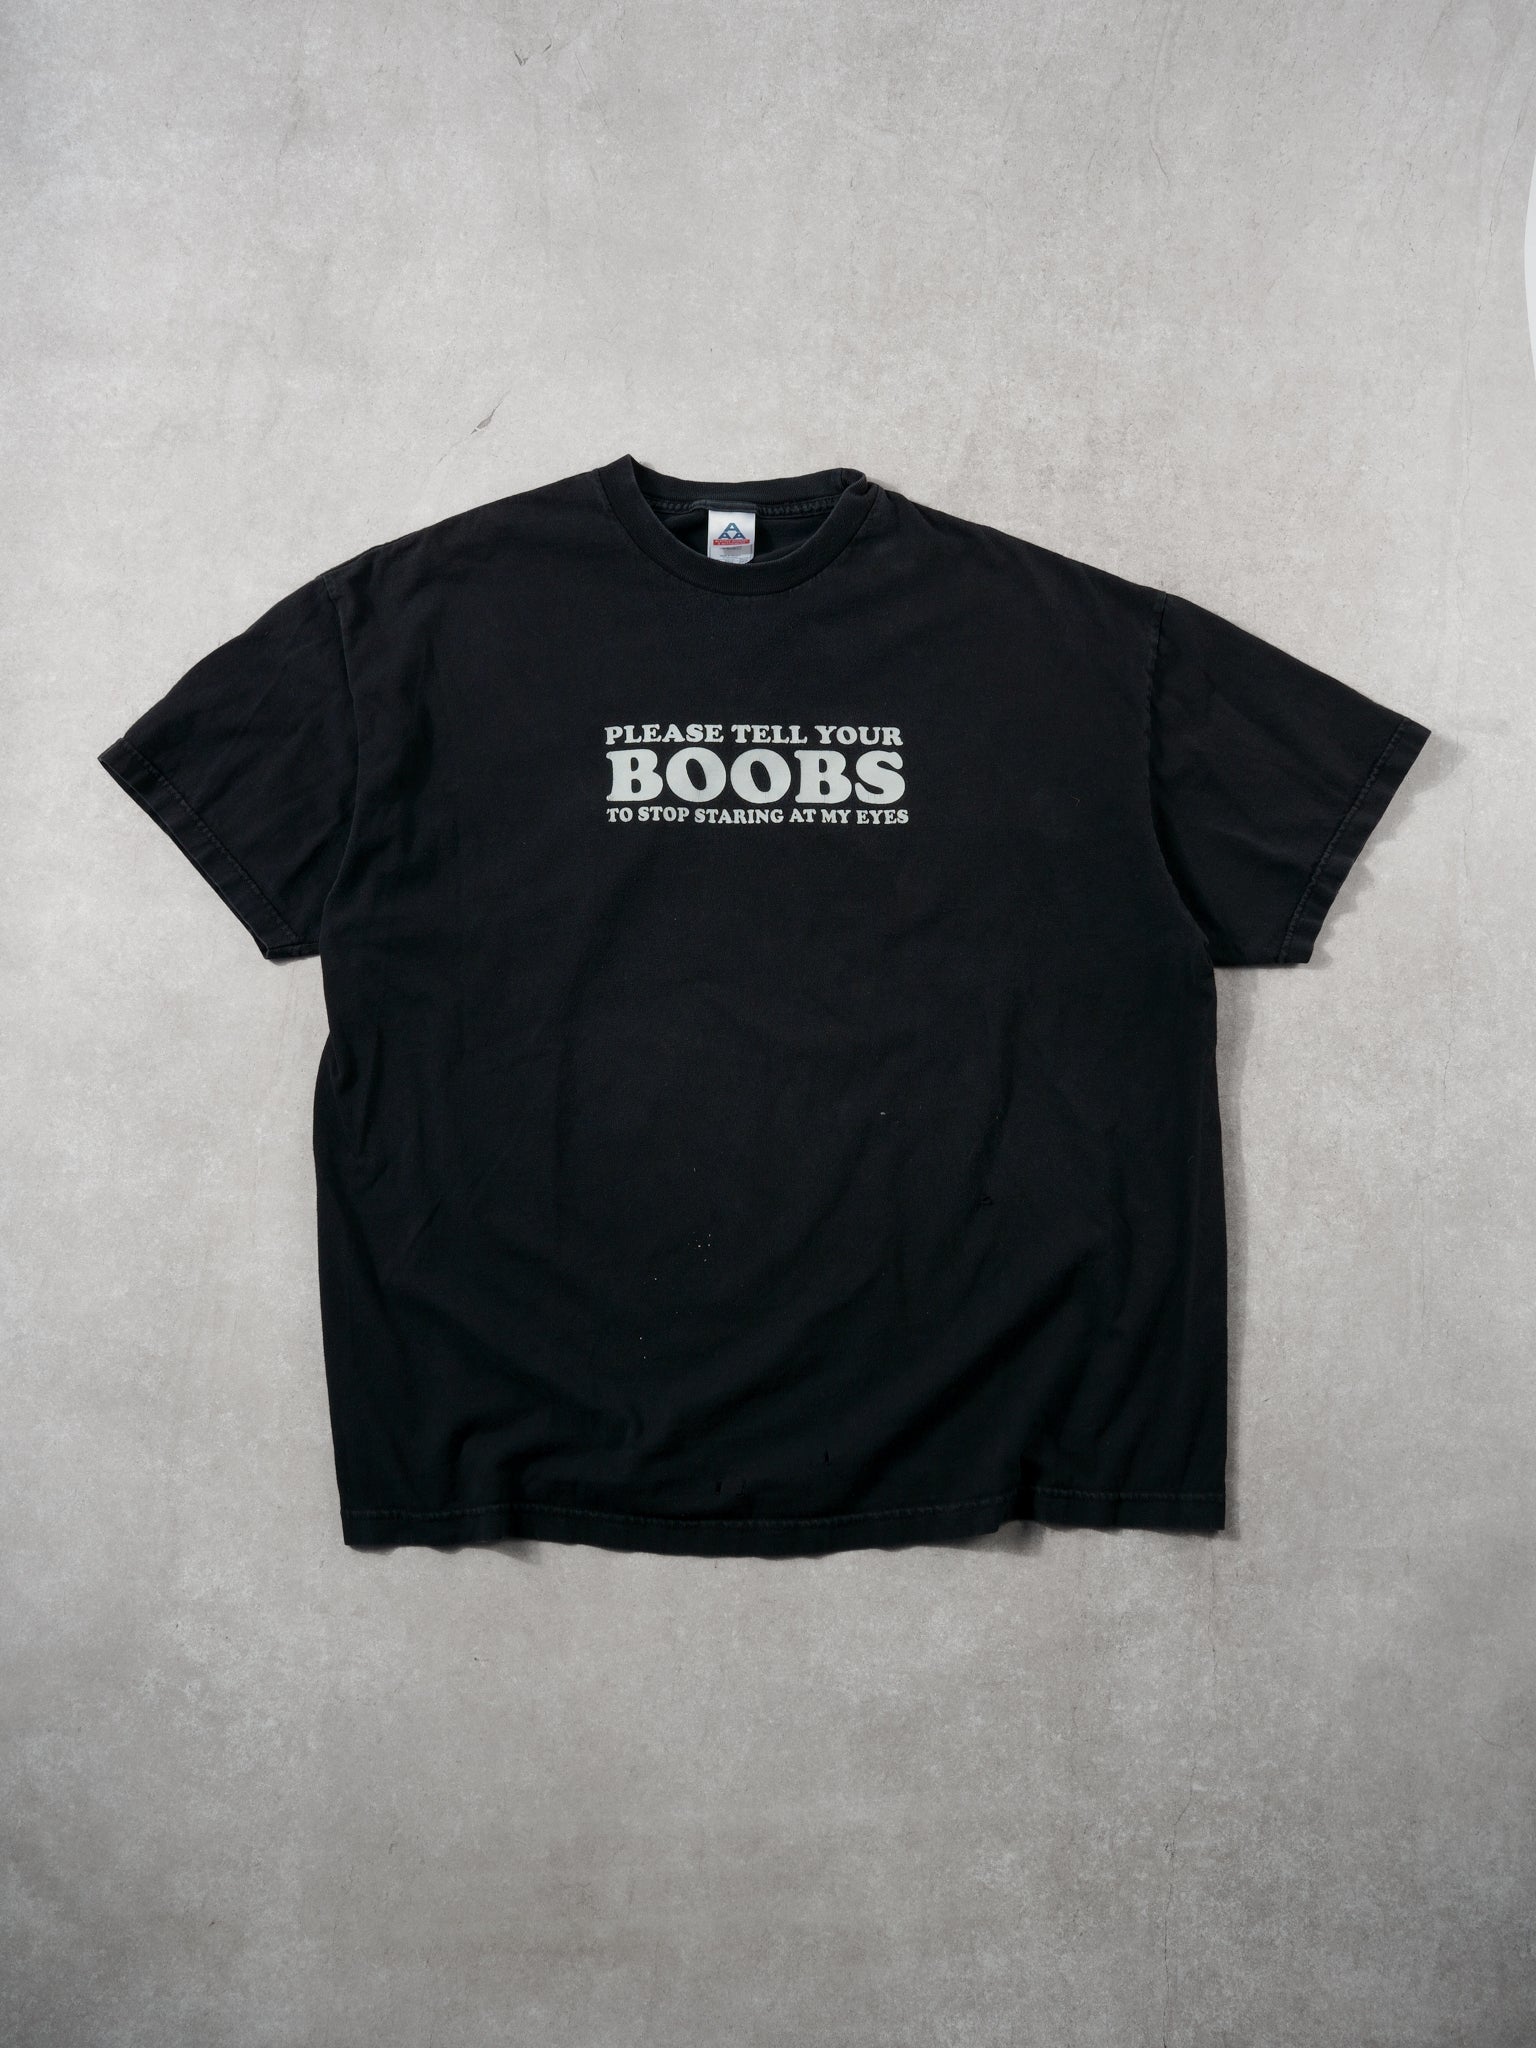 Vintage 90s Black "Please tell your boobs to stop staring at my eyes" Tee (L/XL)